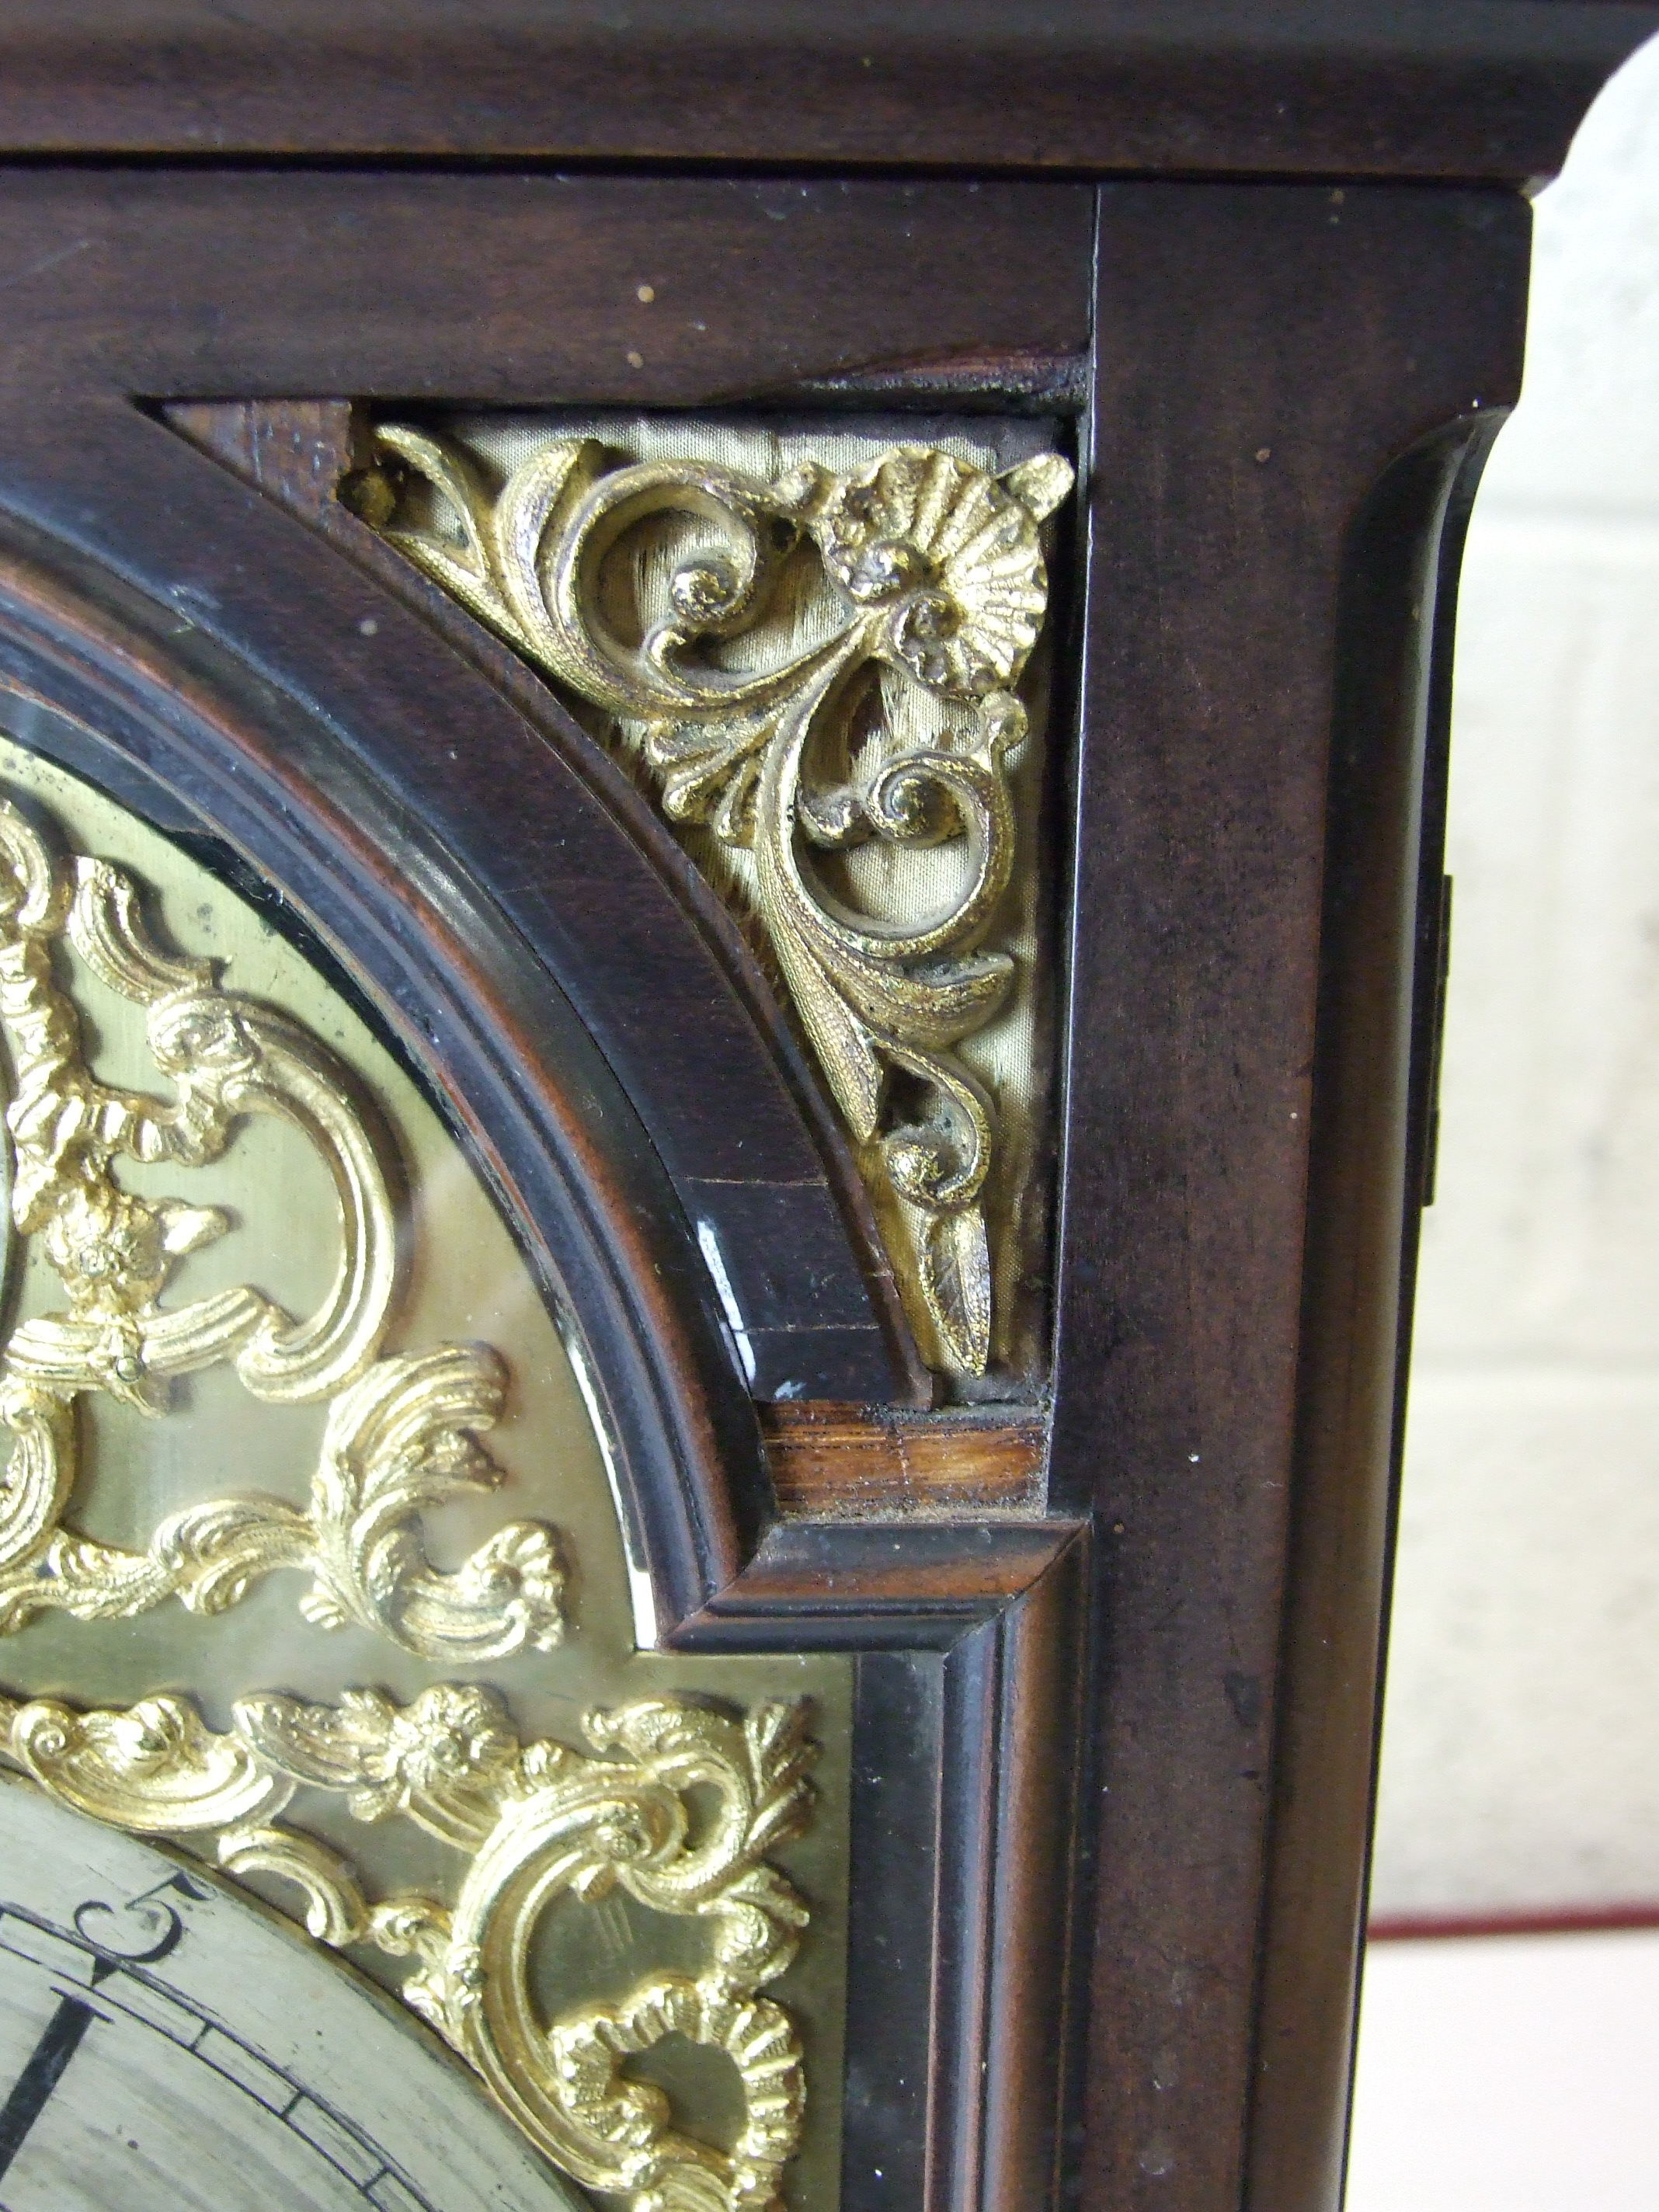 William Ward, London, a late-18th century mahogany bracket clock, the caddy-top case with brass - Image 8 of 11